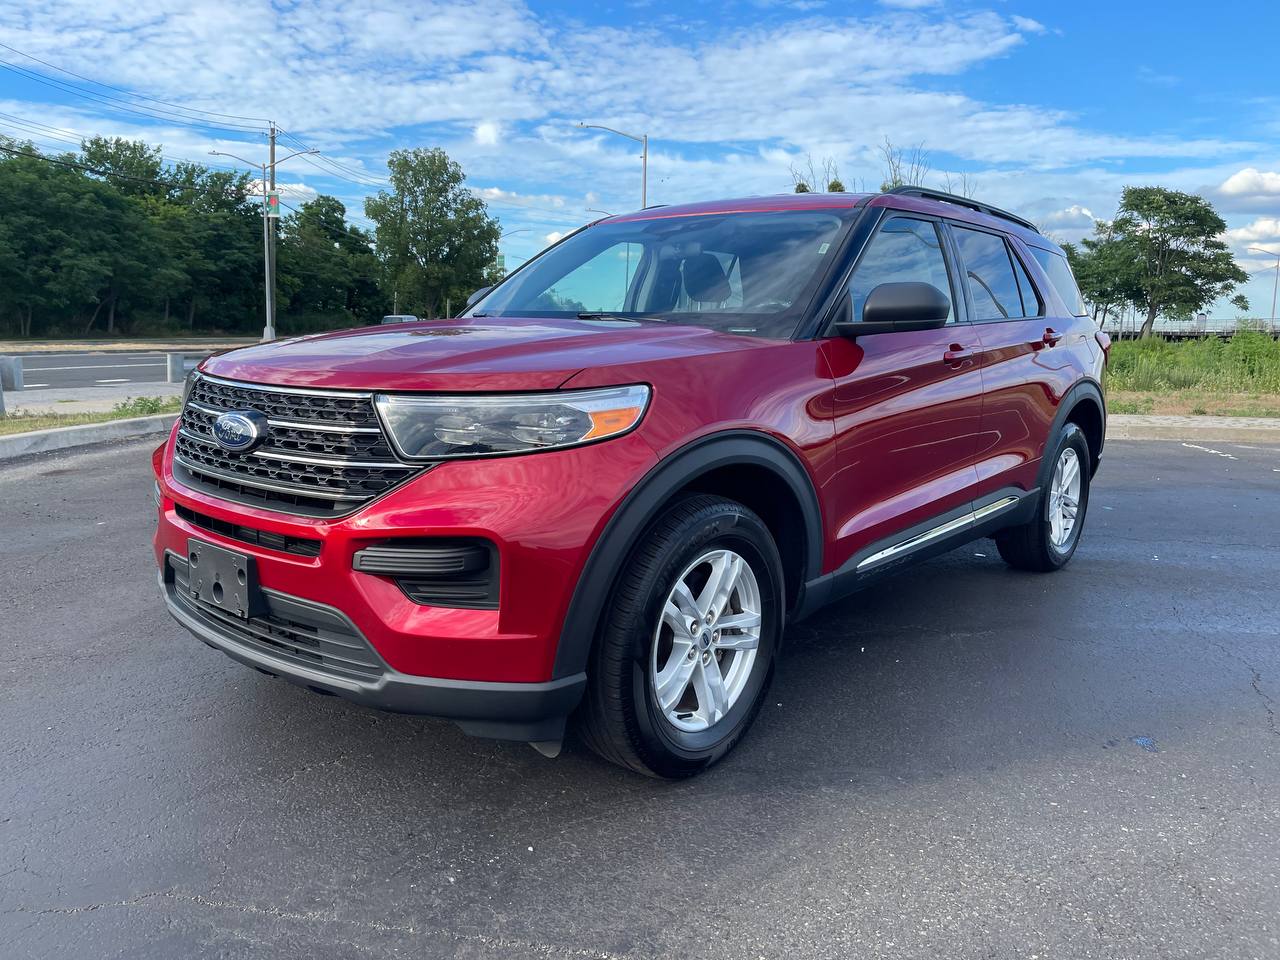 Used Car - 2020 Ford Explorer XLT AWD for Sale in Staten Island, NY